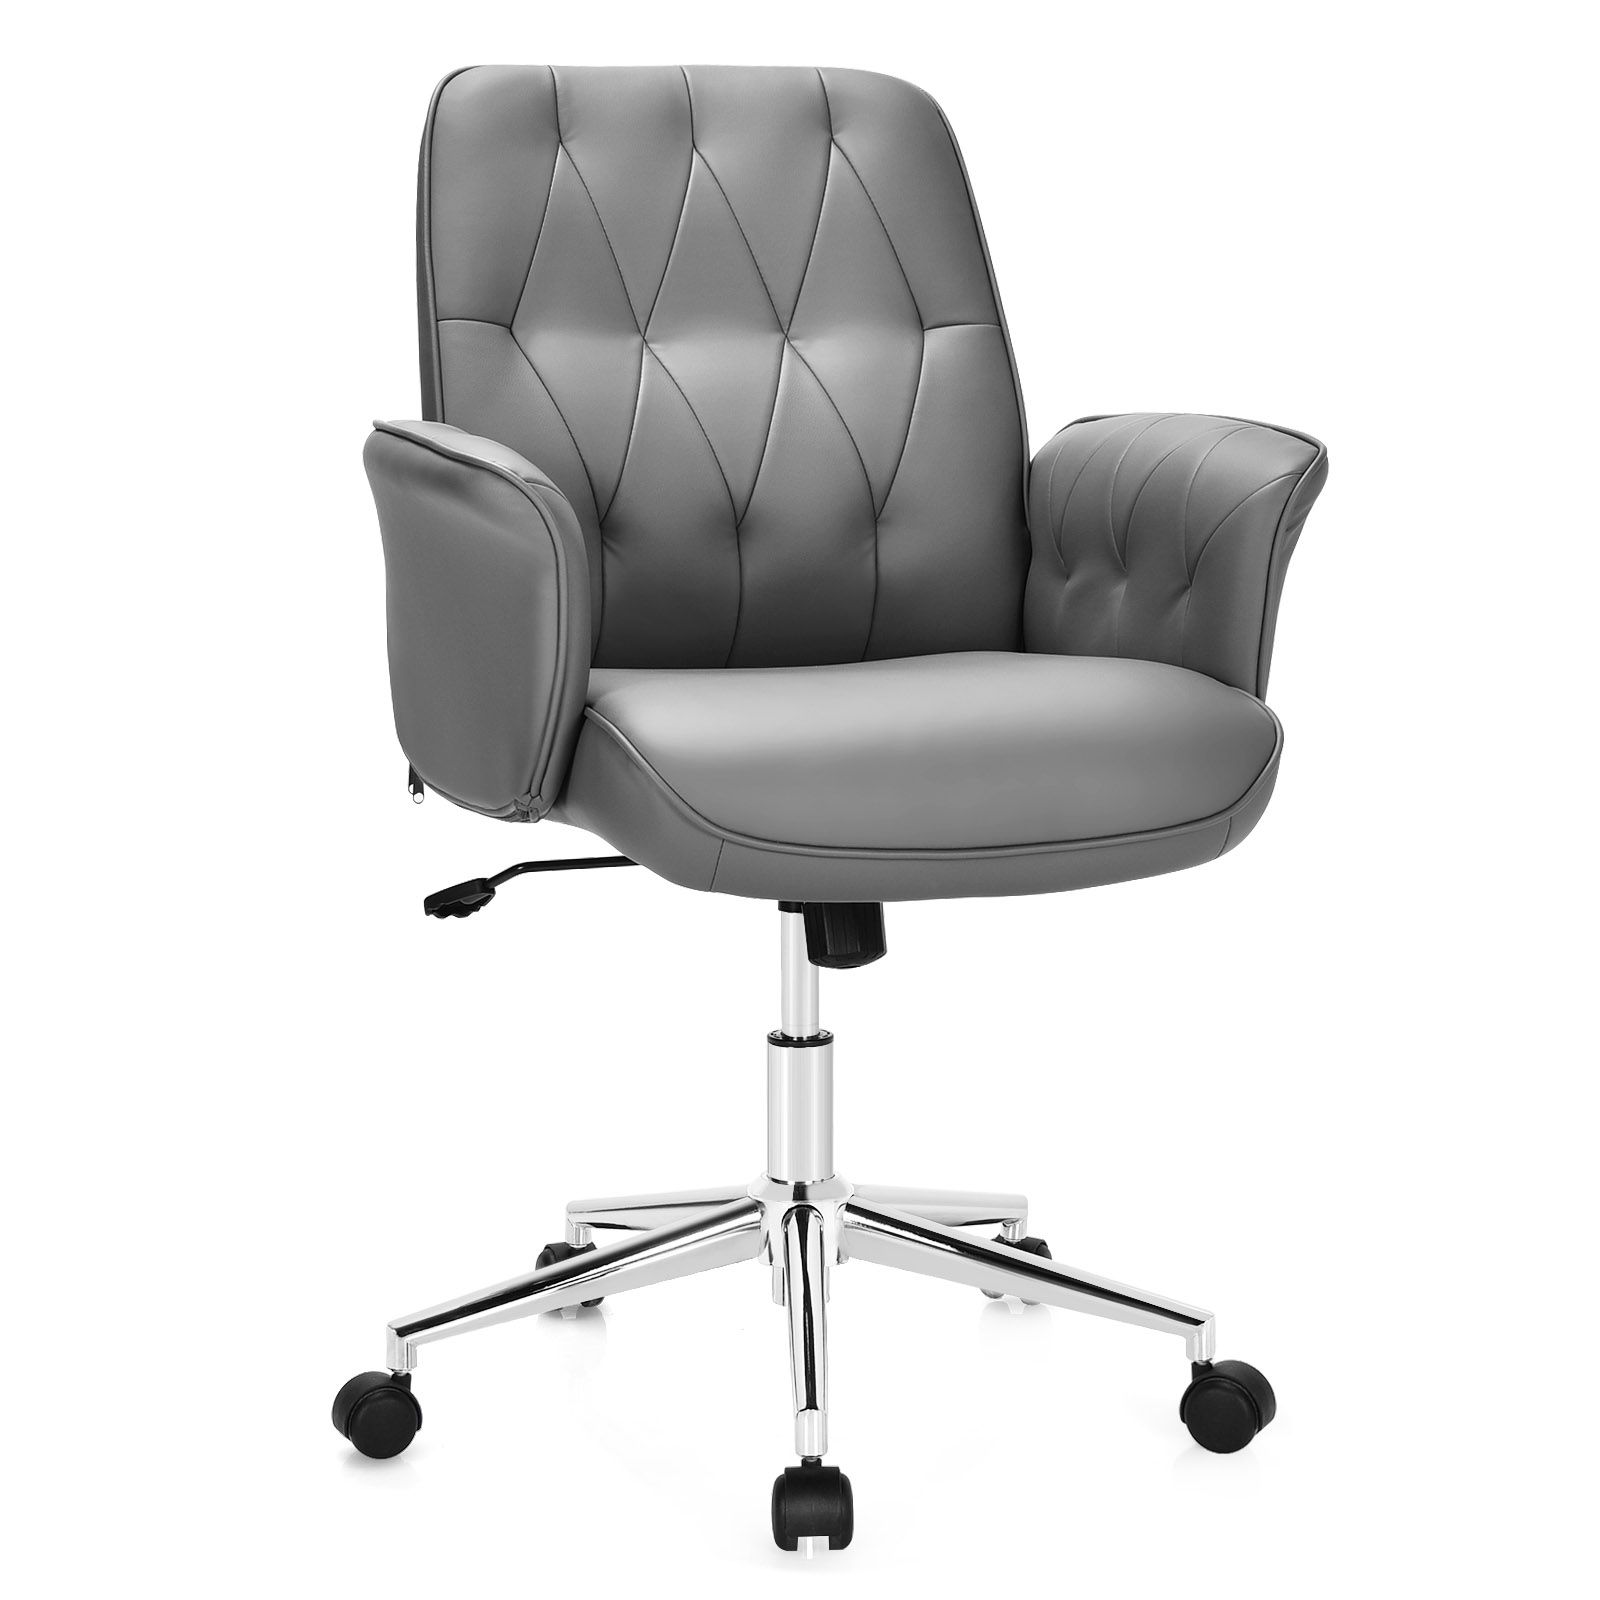 Adjustable Swivel PU Leather Office Chair with Rocking Function